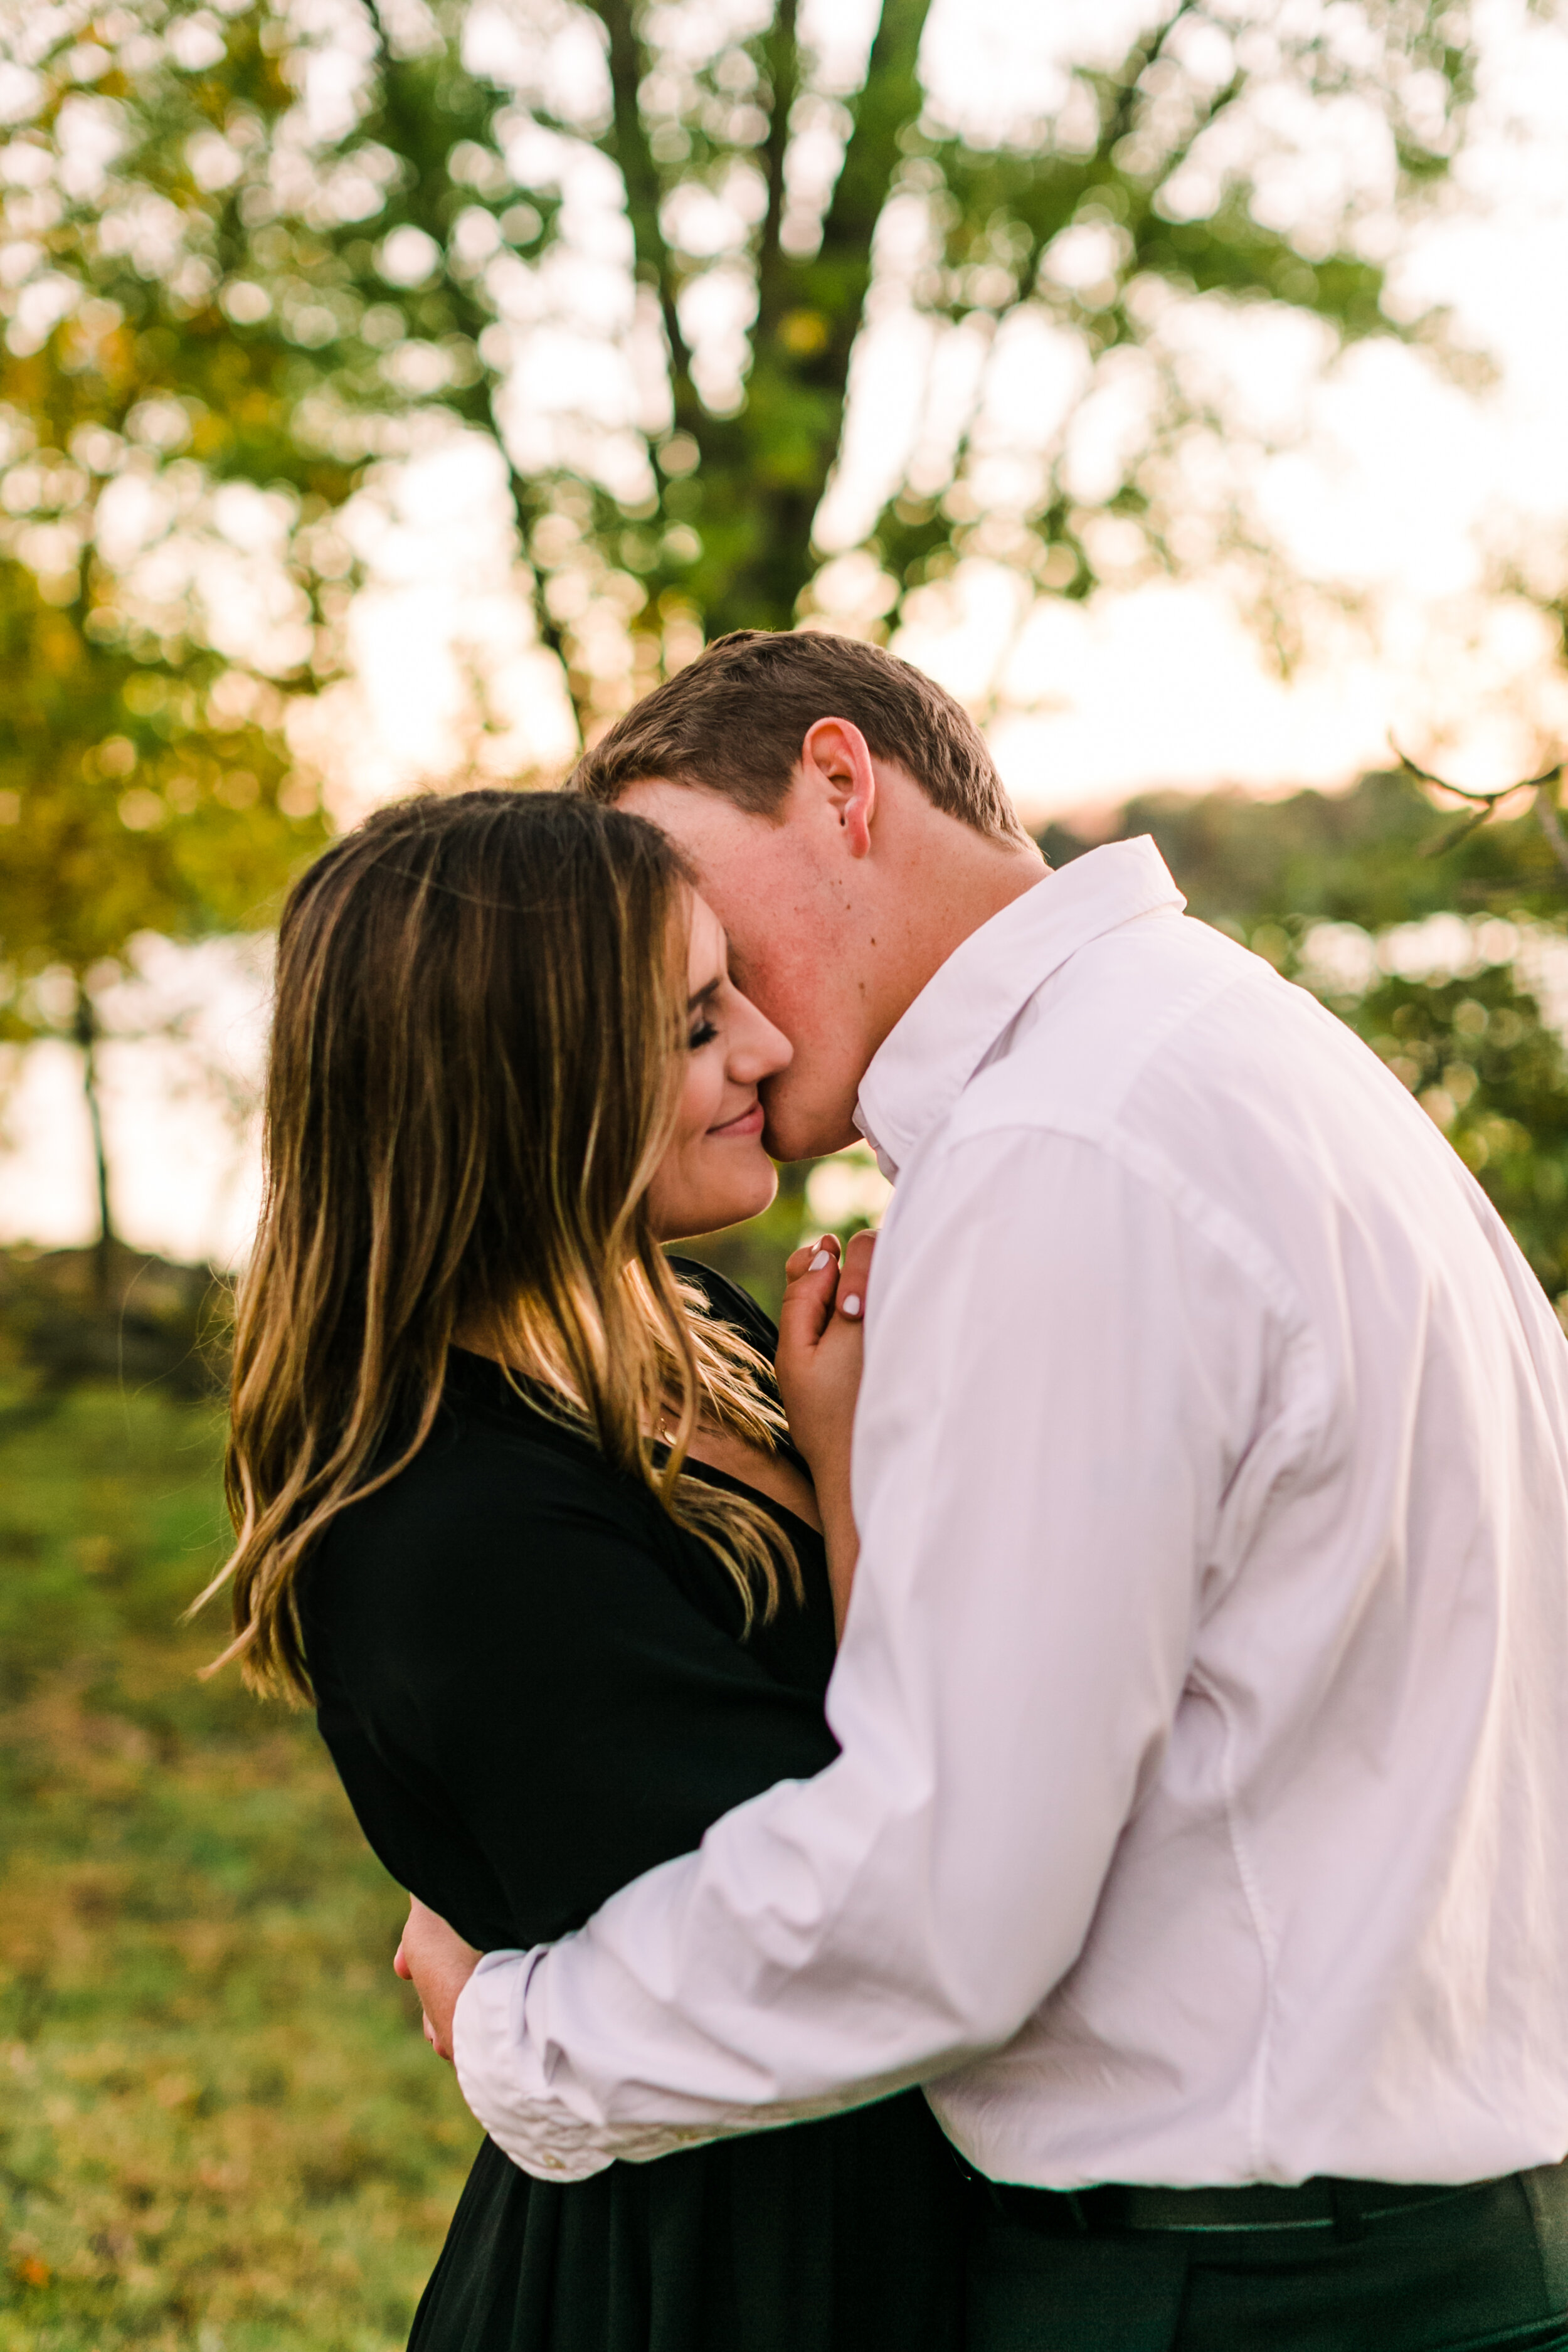 Tennessee+Fall+Engagement+Photos+Puppy (59 of 63).jpg